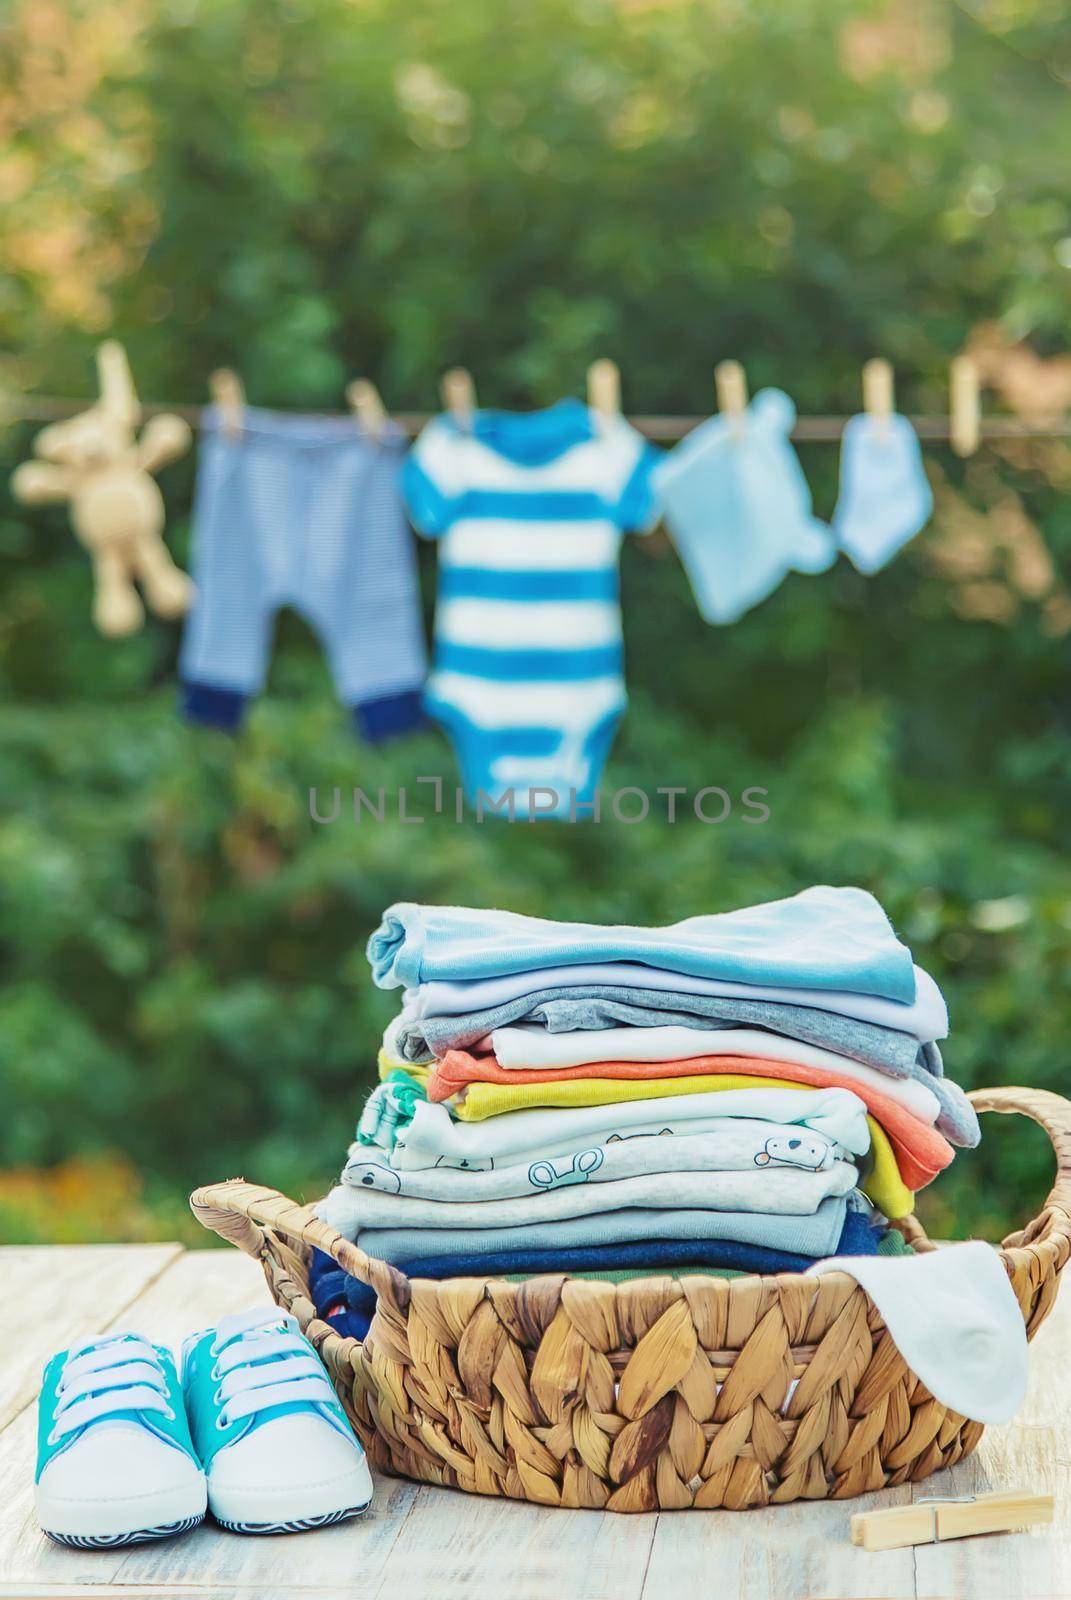 washing baby clothes. Linen dries in the fresh air. Selective focus. nature.